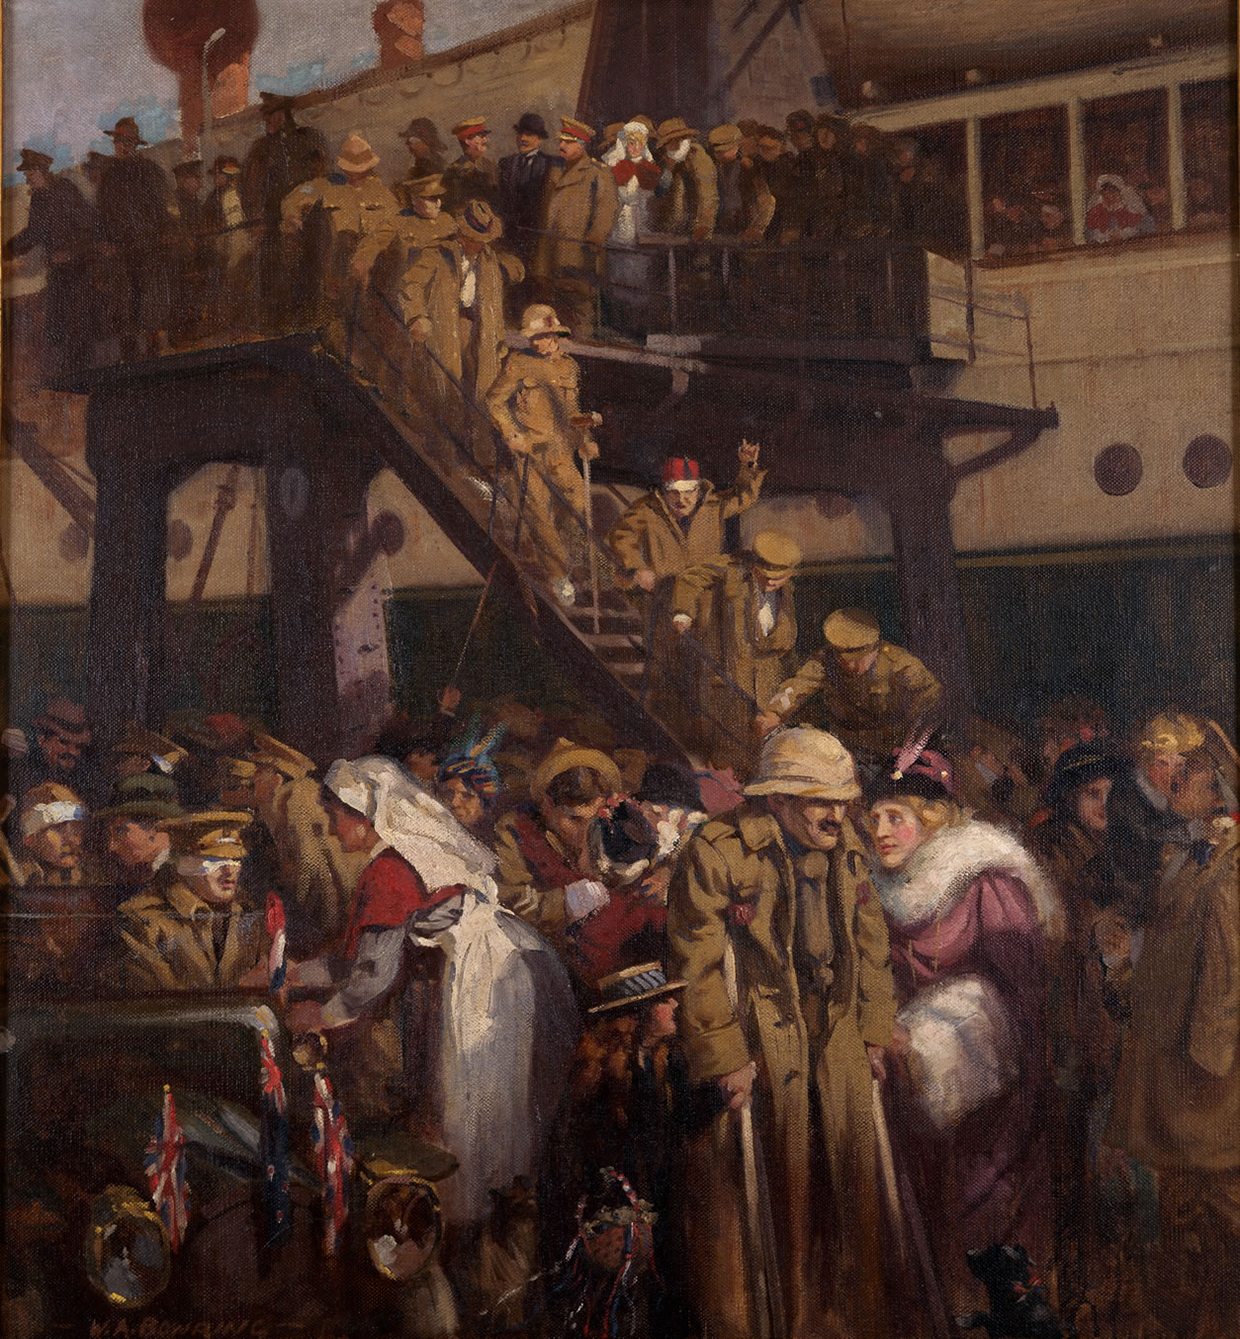 The Homecoming from Gallipoli, by Walter Armiger Bowring, 1916. On 15 July 1915, the SS Willochra arrived in Wellington carrying the first batch of New Zealand wounded from Gallipoli. This painting is part of the New Zealand government’s War Art collection.